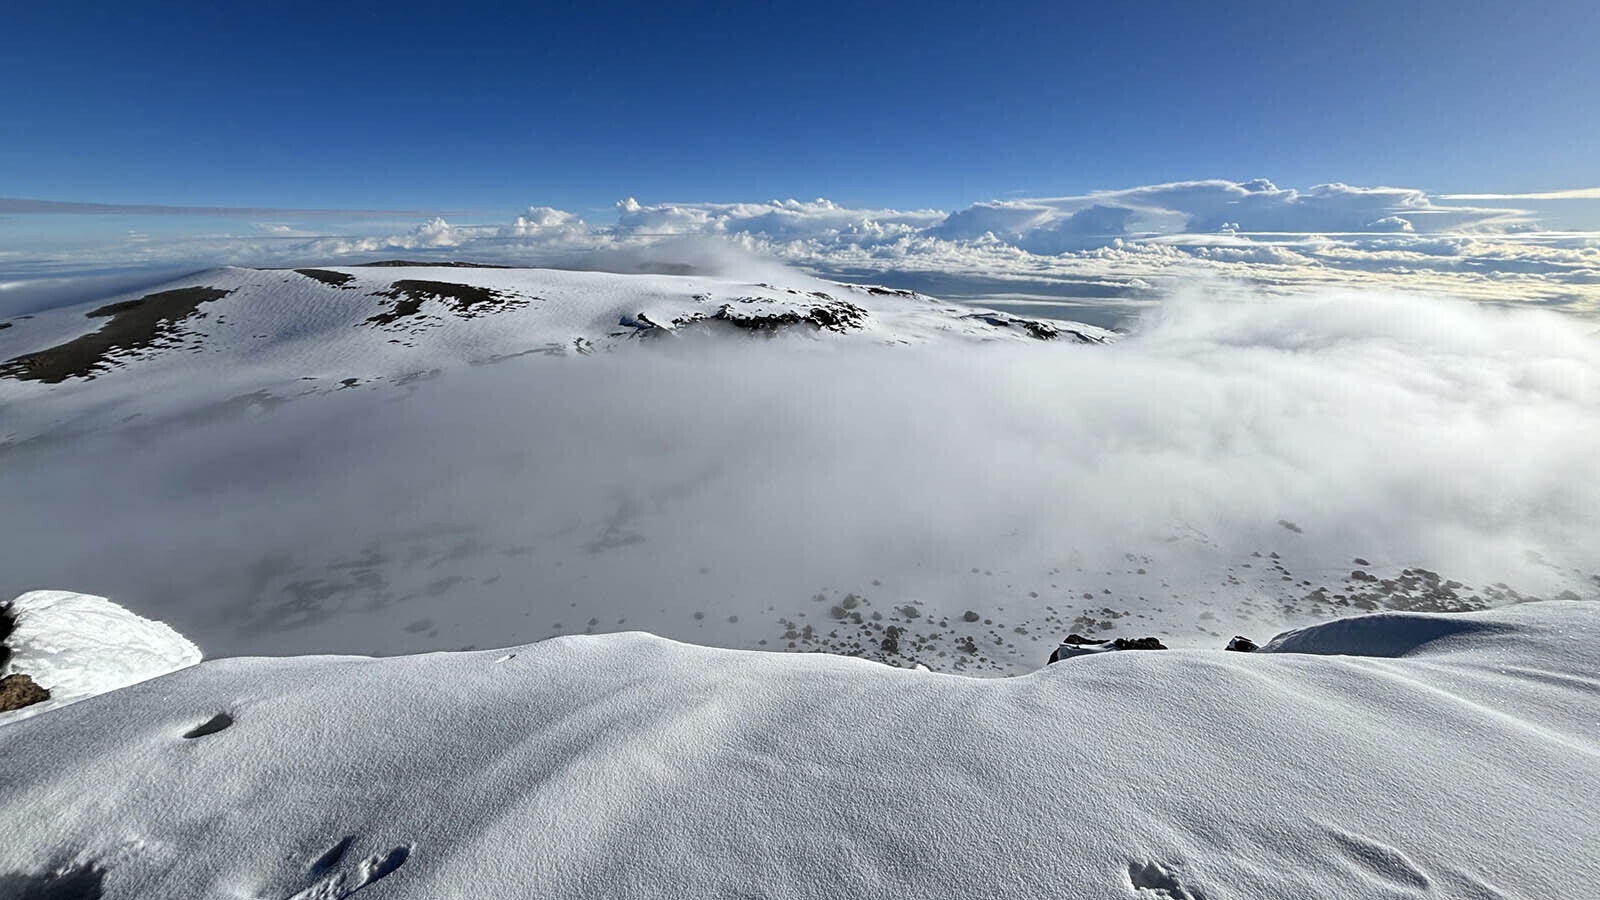 From the top of Kilimanjaro, an Arctic landscape unfolds.